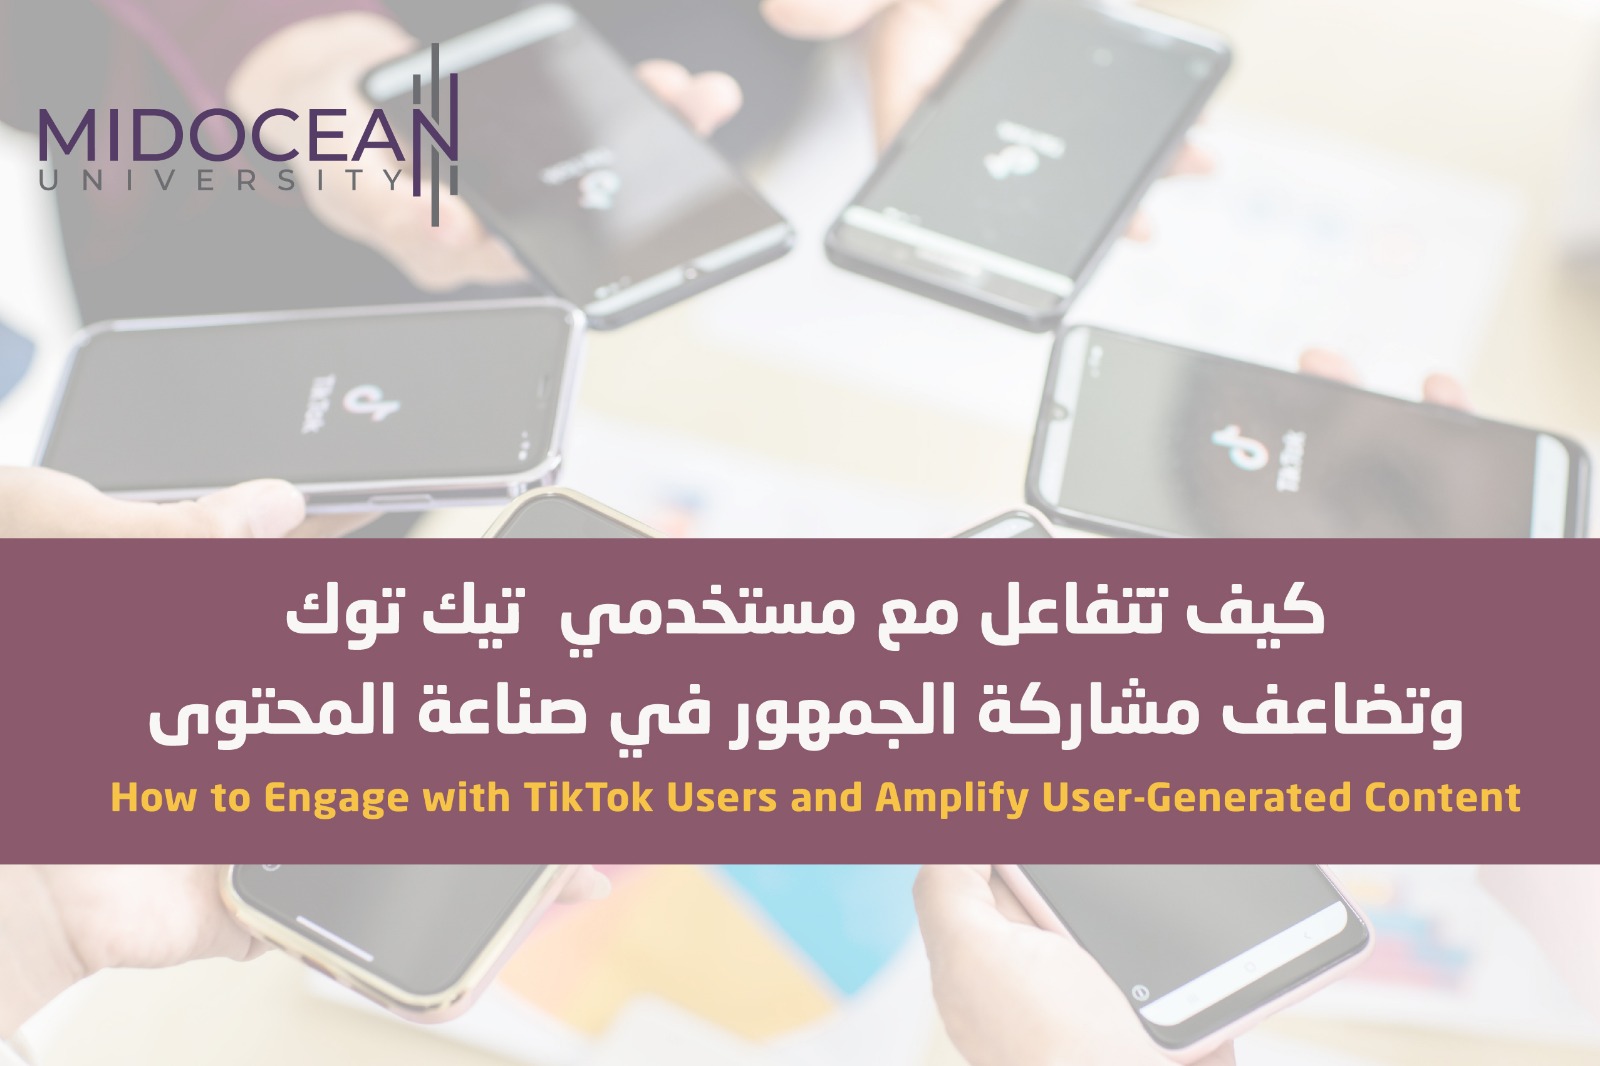 How to Engage with TikTok Users and Amplify User-Generated Content